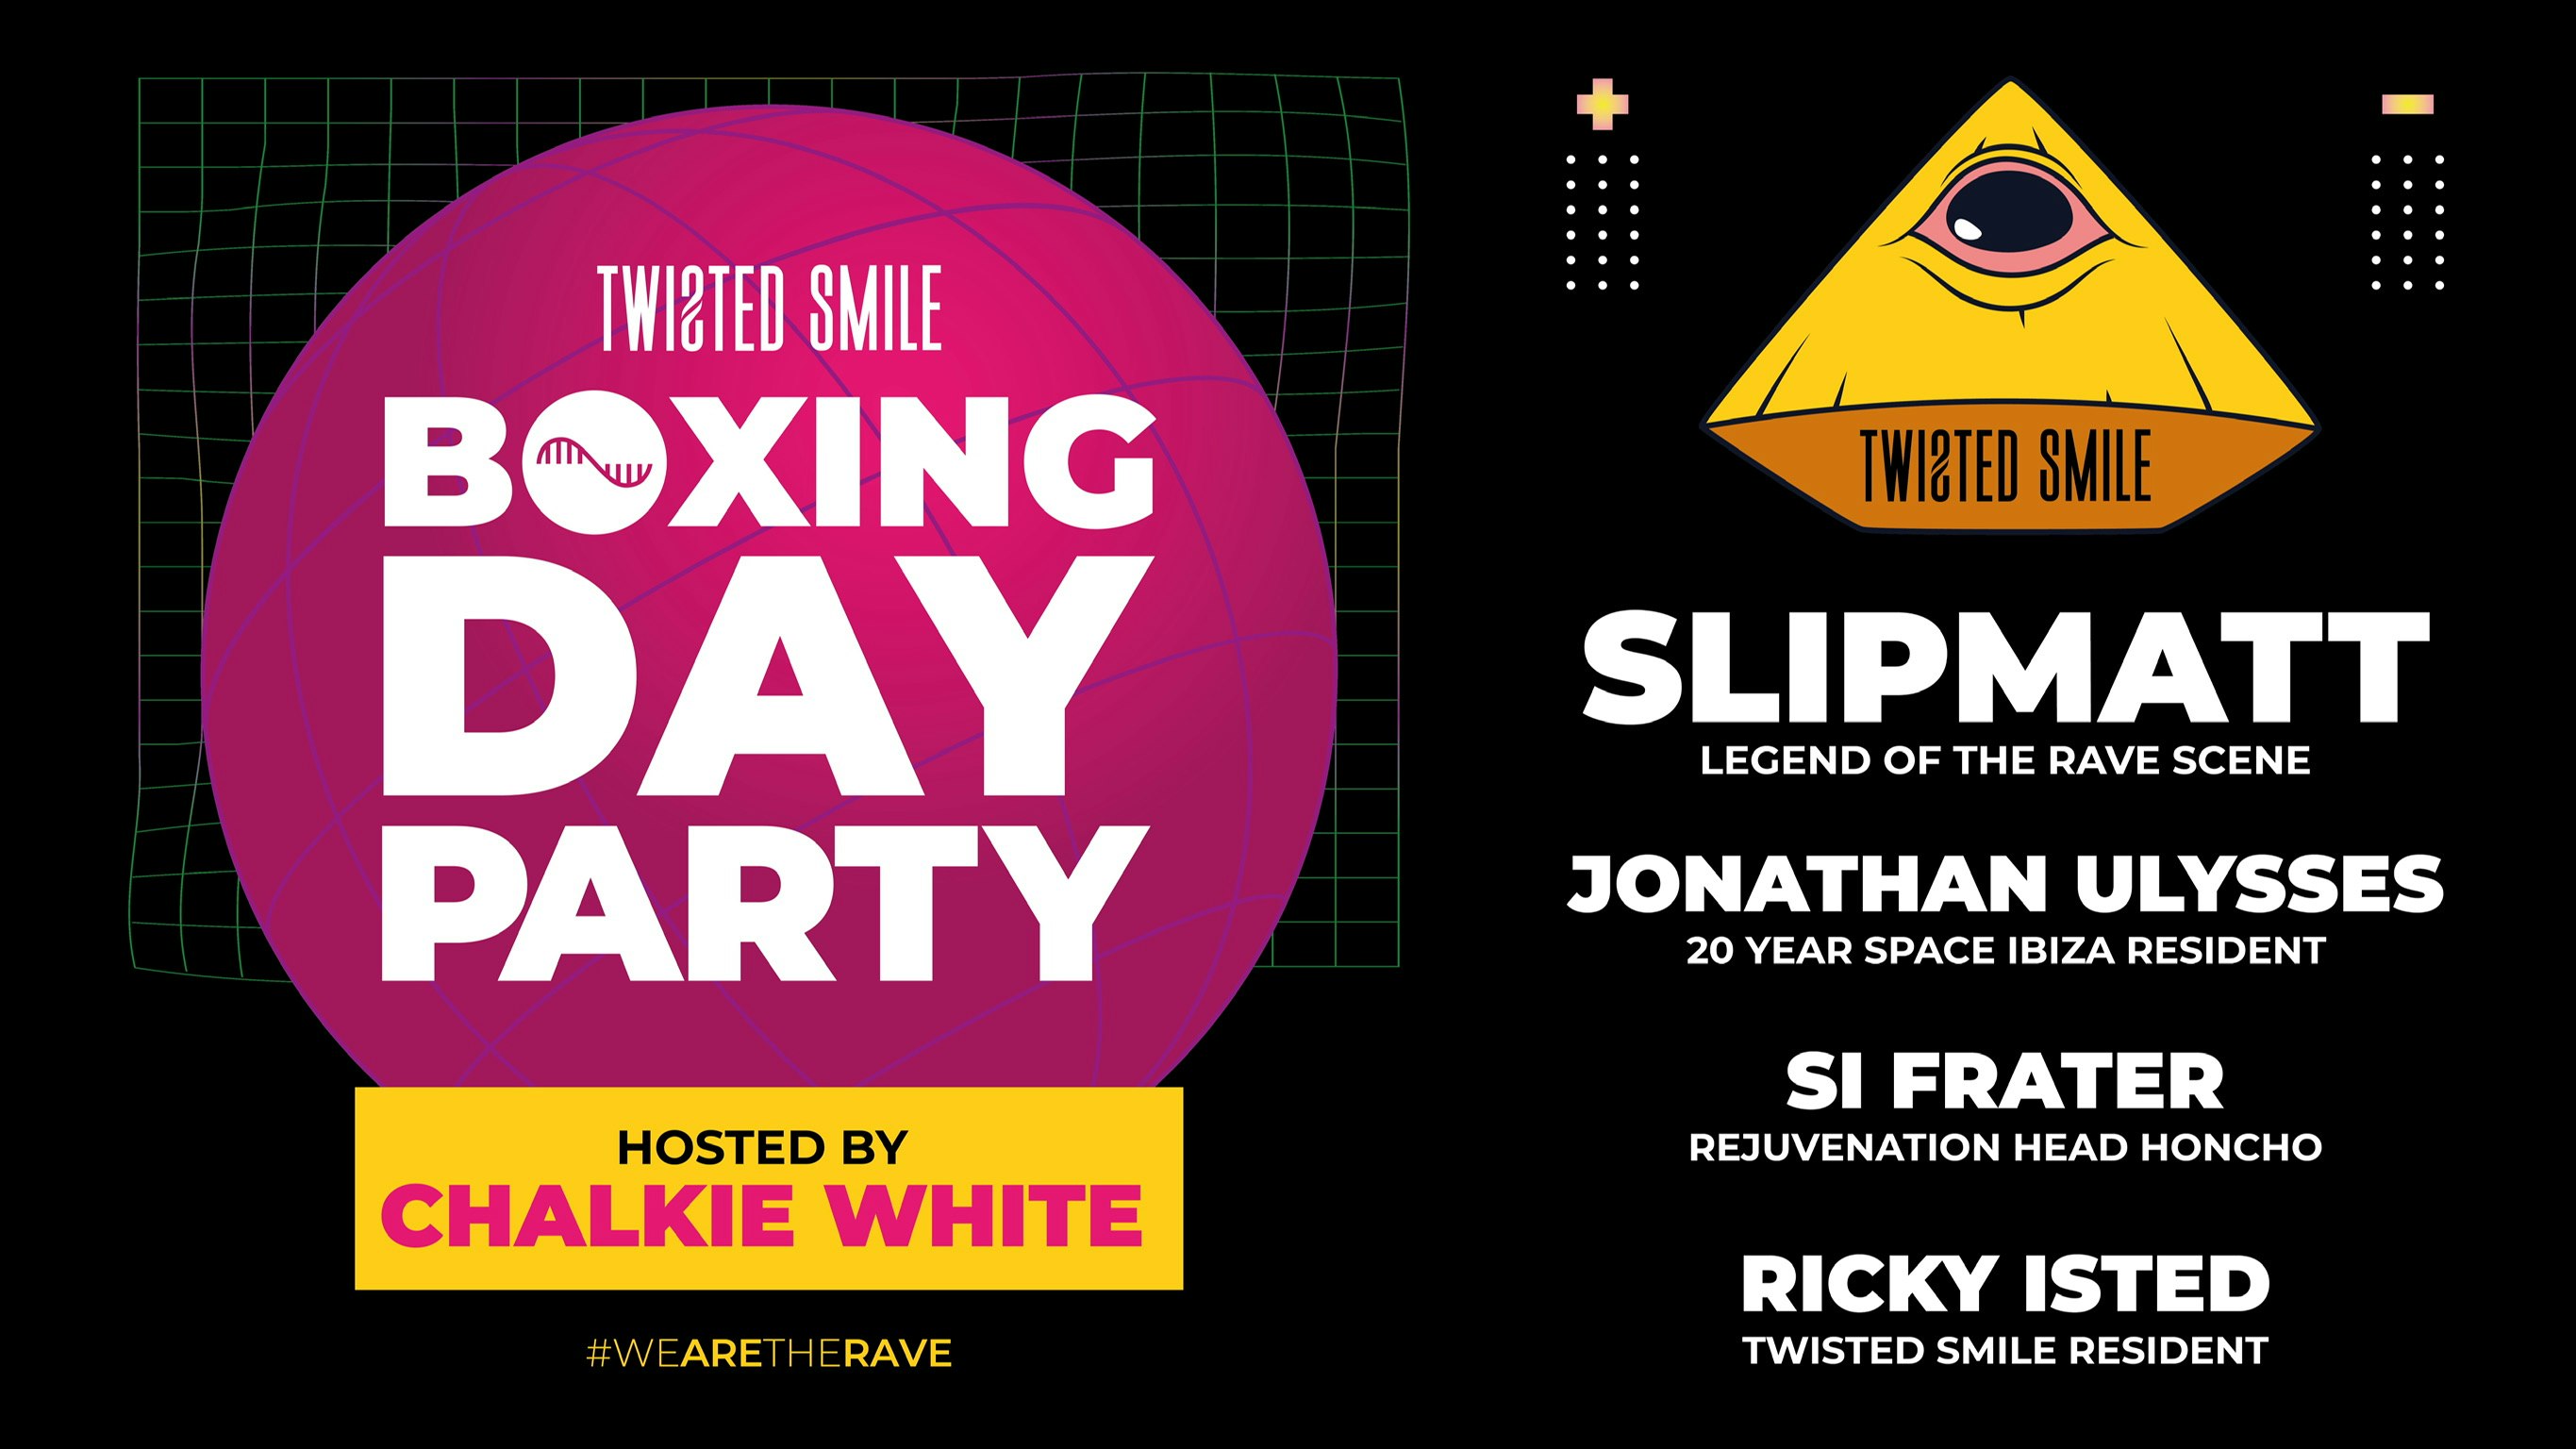 Twisted Smile ‘We Are The Rave’ Boxing Day Party